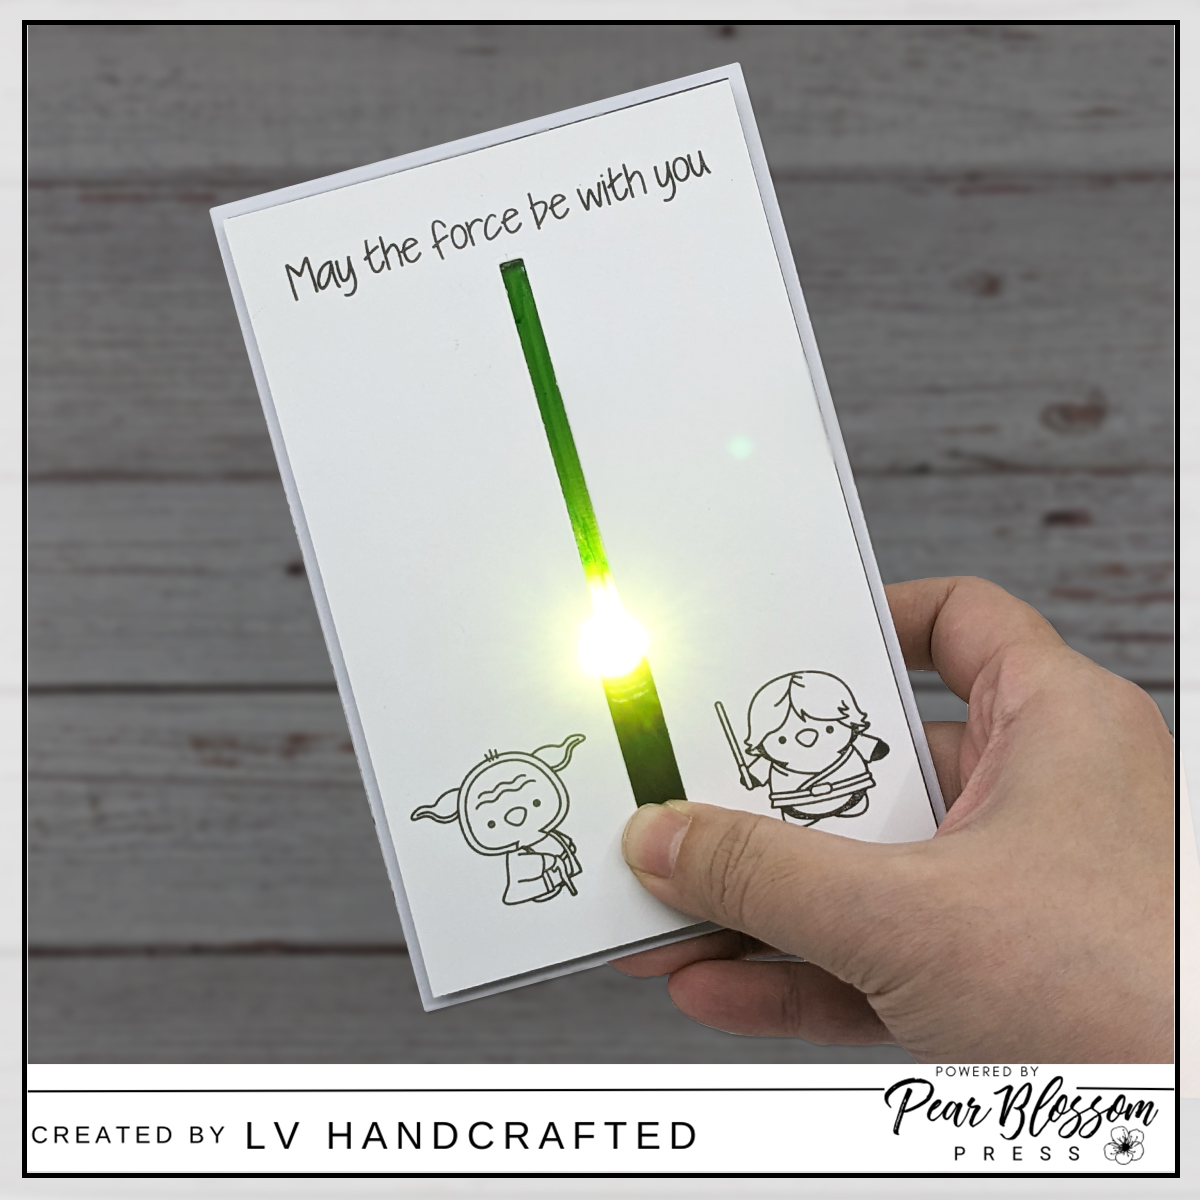 May the Force Be With You – Let’s Make a Lightsaber!